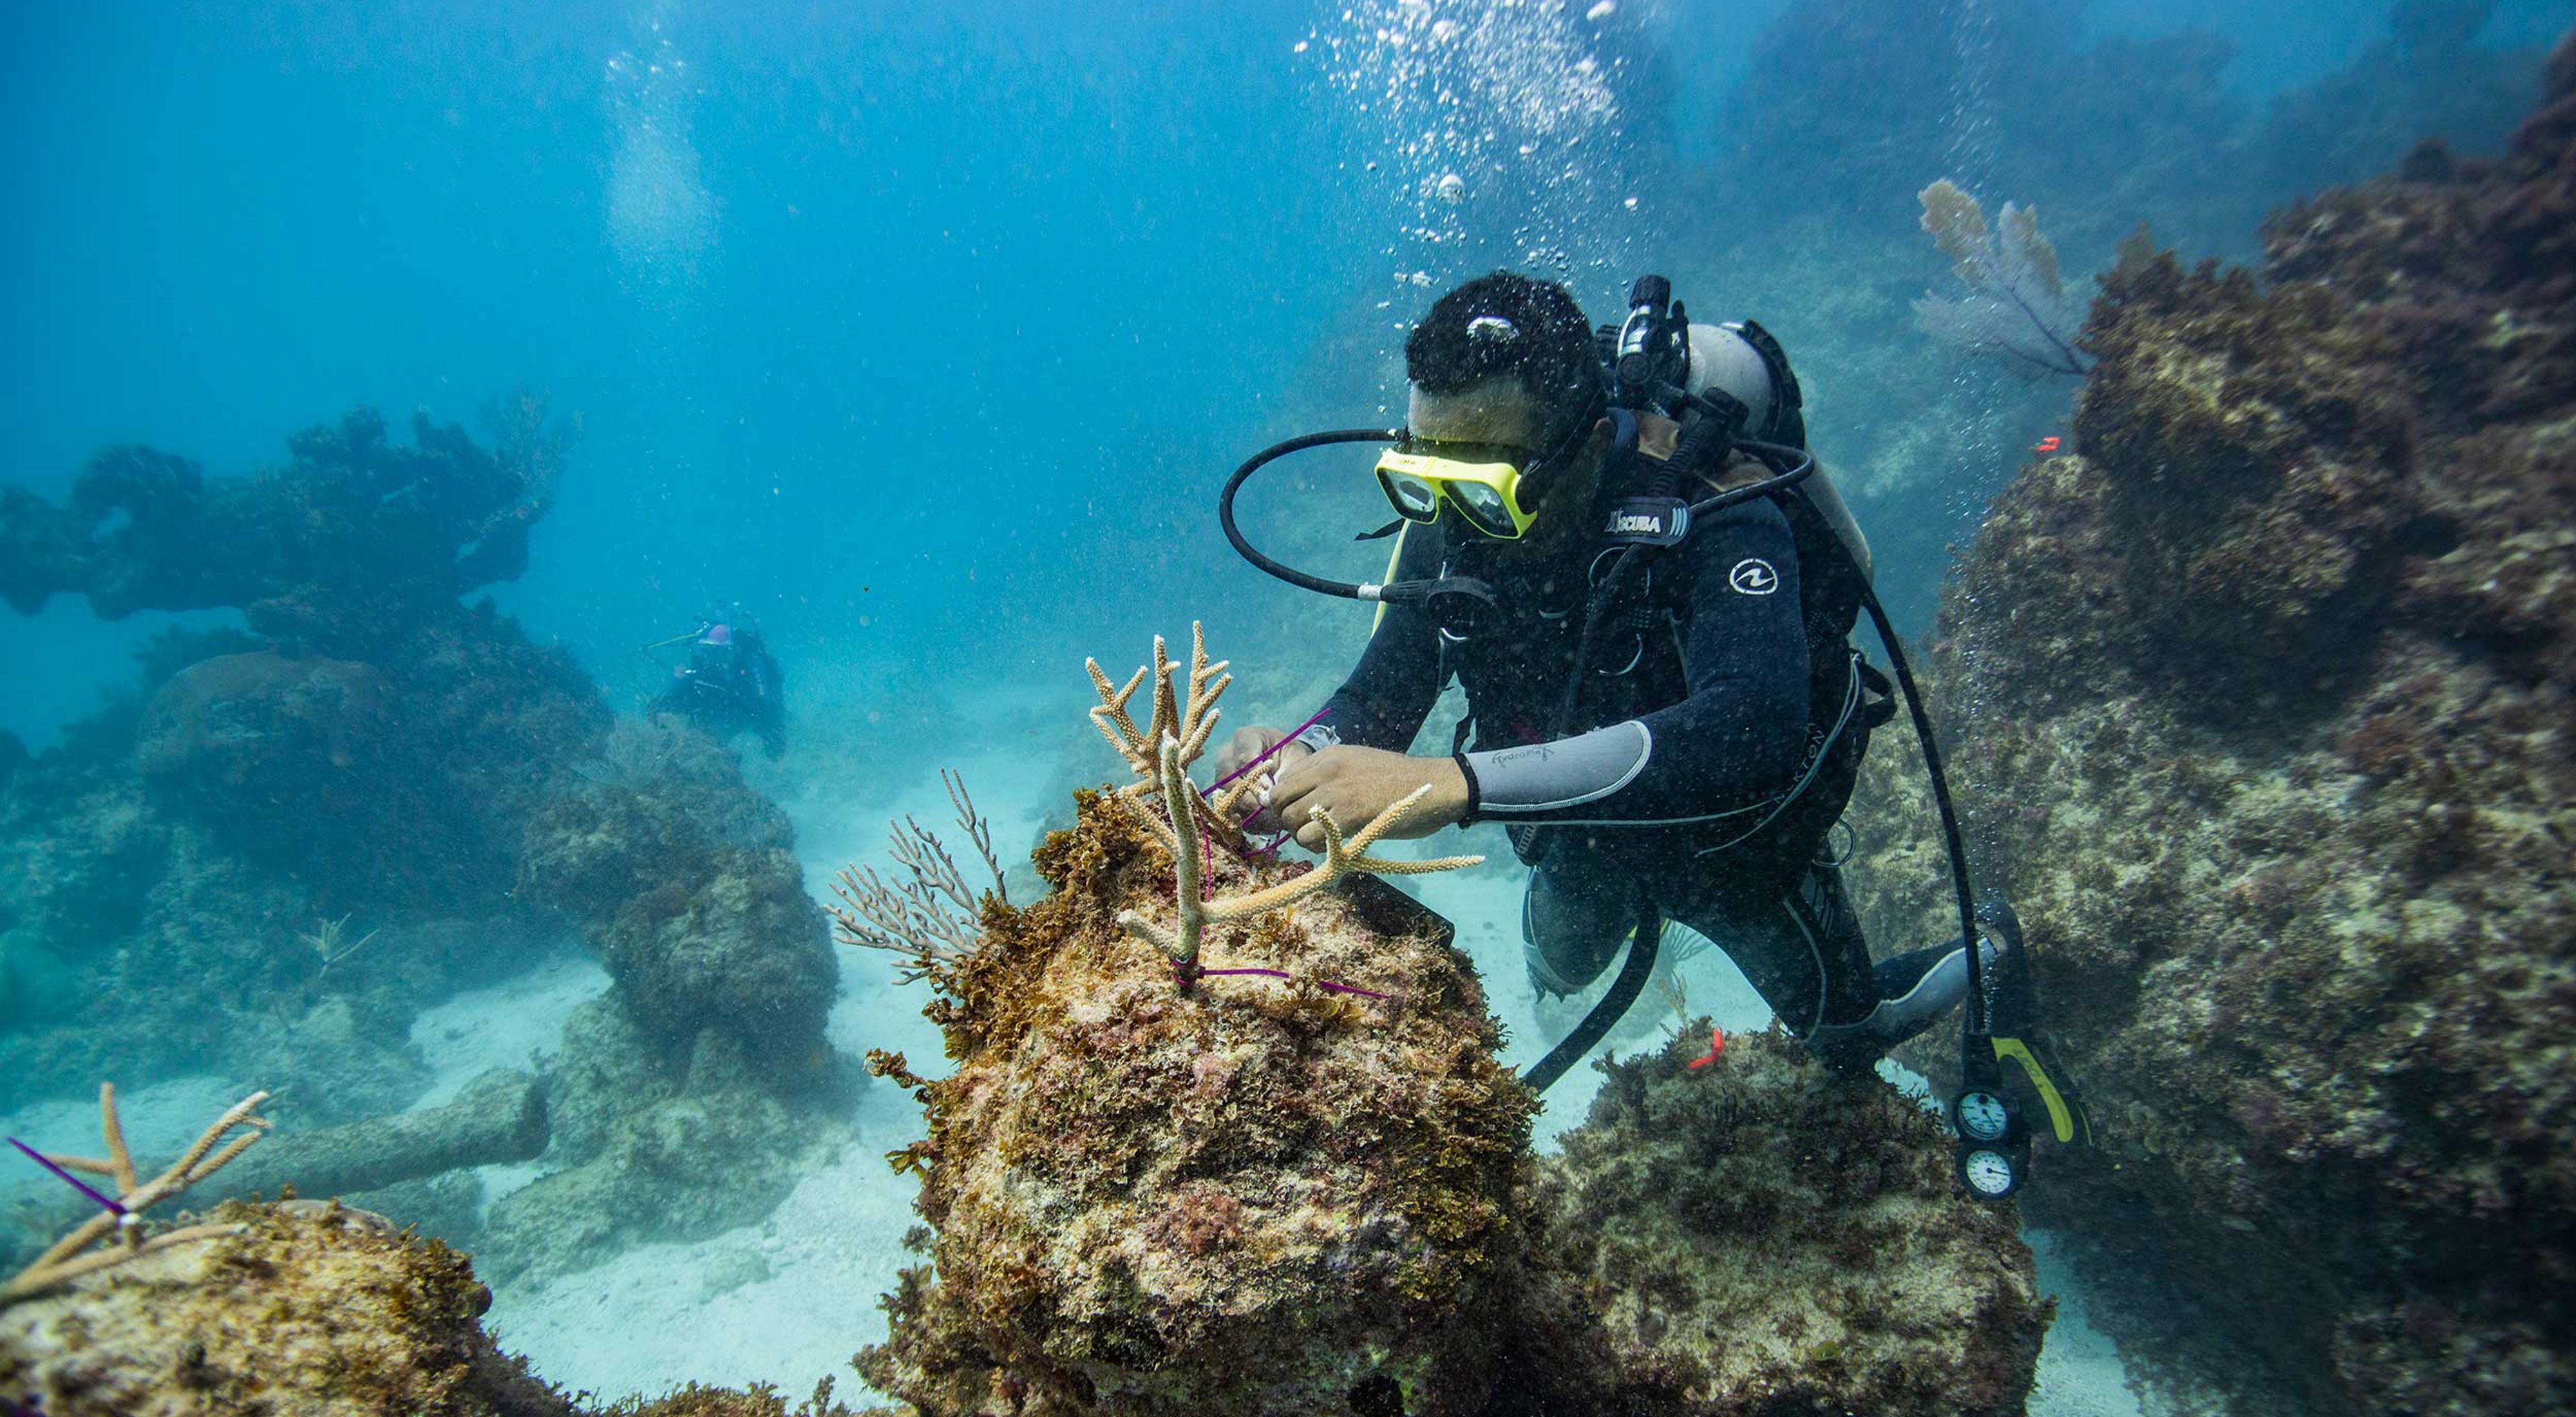 Underwater view of a person attaching coral reef fragments to coral in the waters of the Dominican Republic.